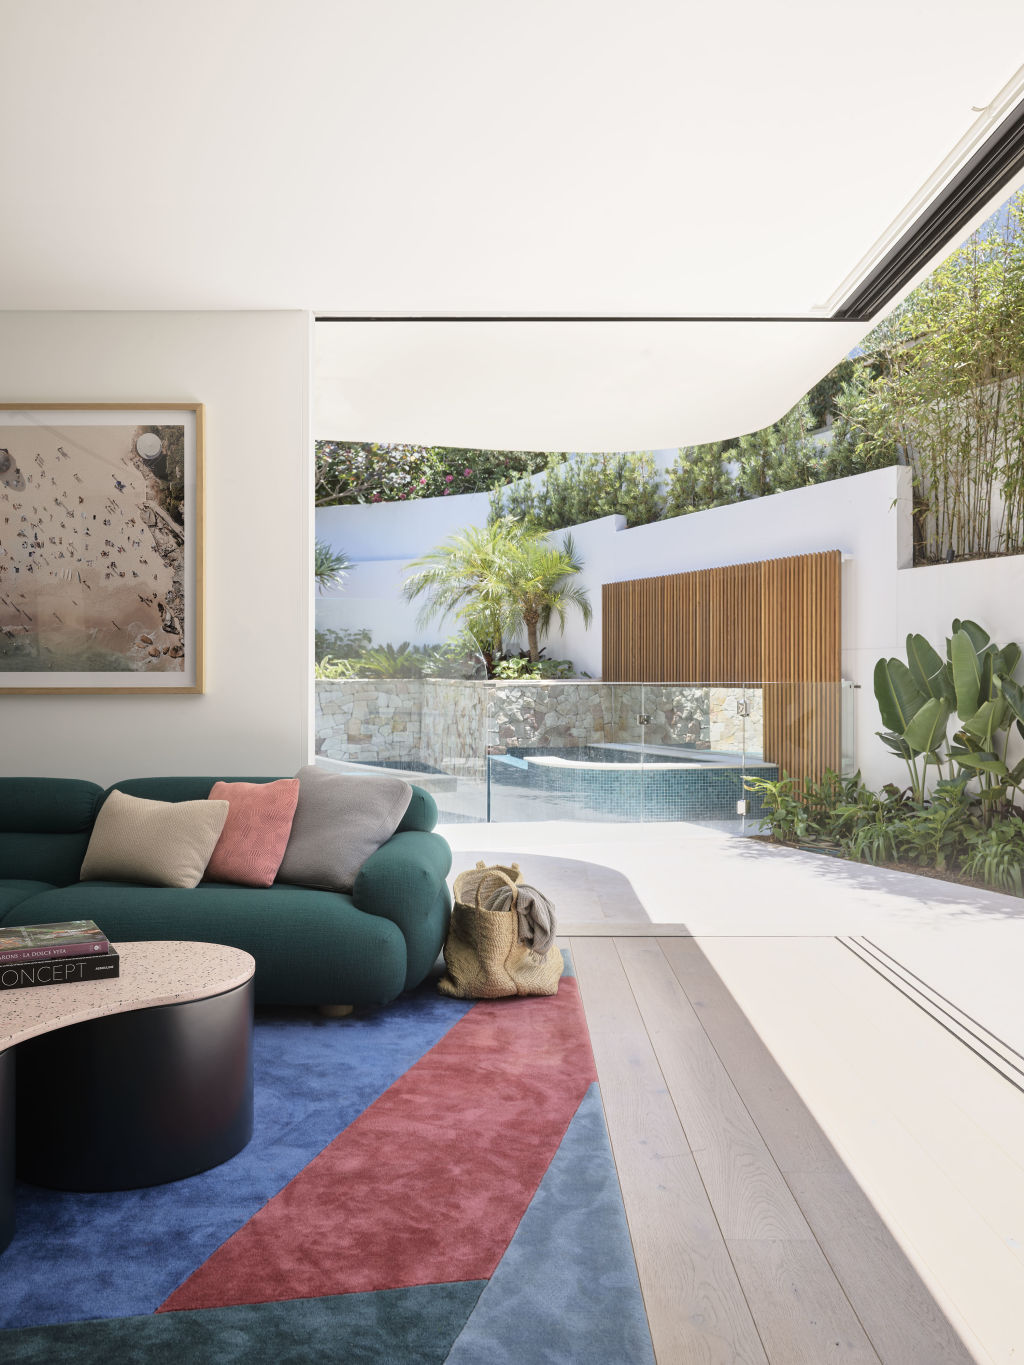 The home's younger spaces are bright and happy. Photo: Anson Smart